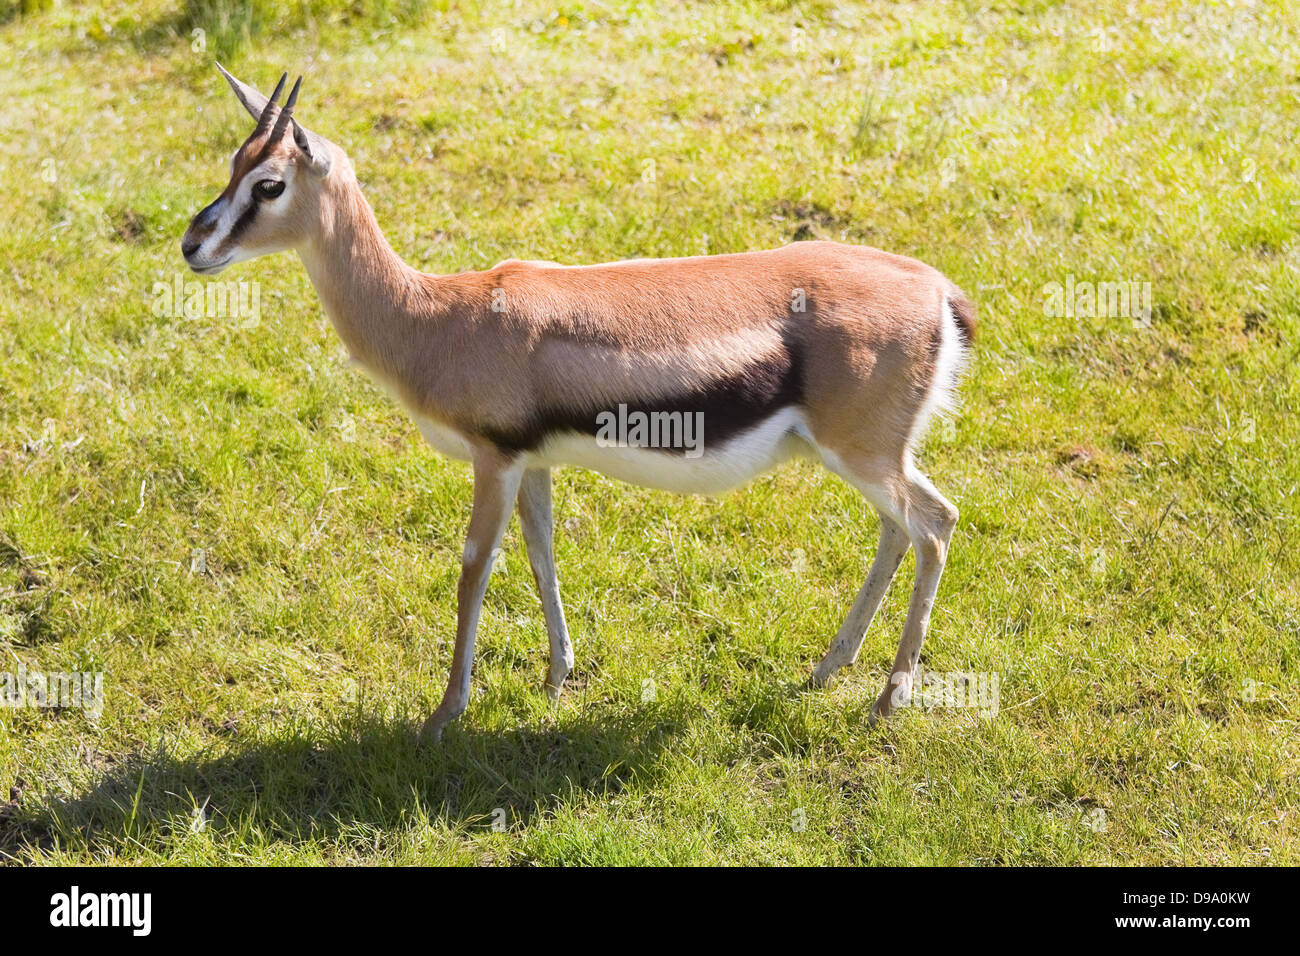 African Mhorr gazelle standing on grass in sunshine Stock Photo